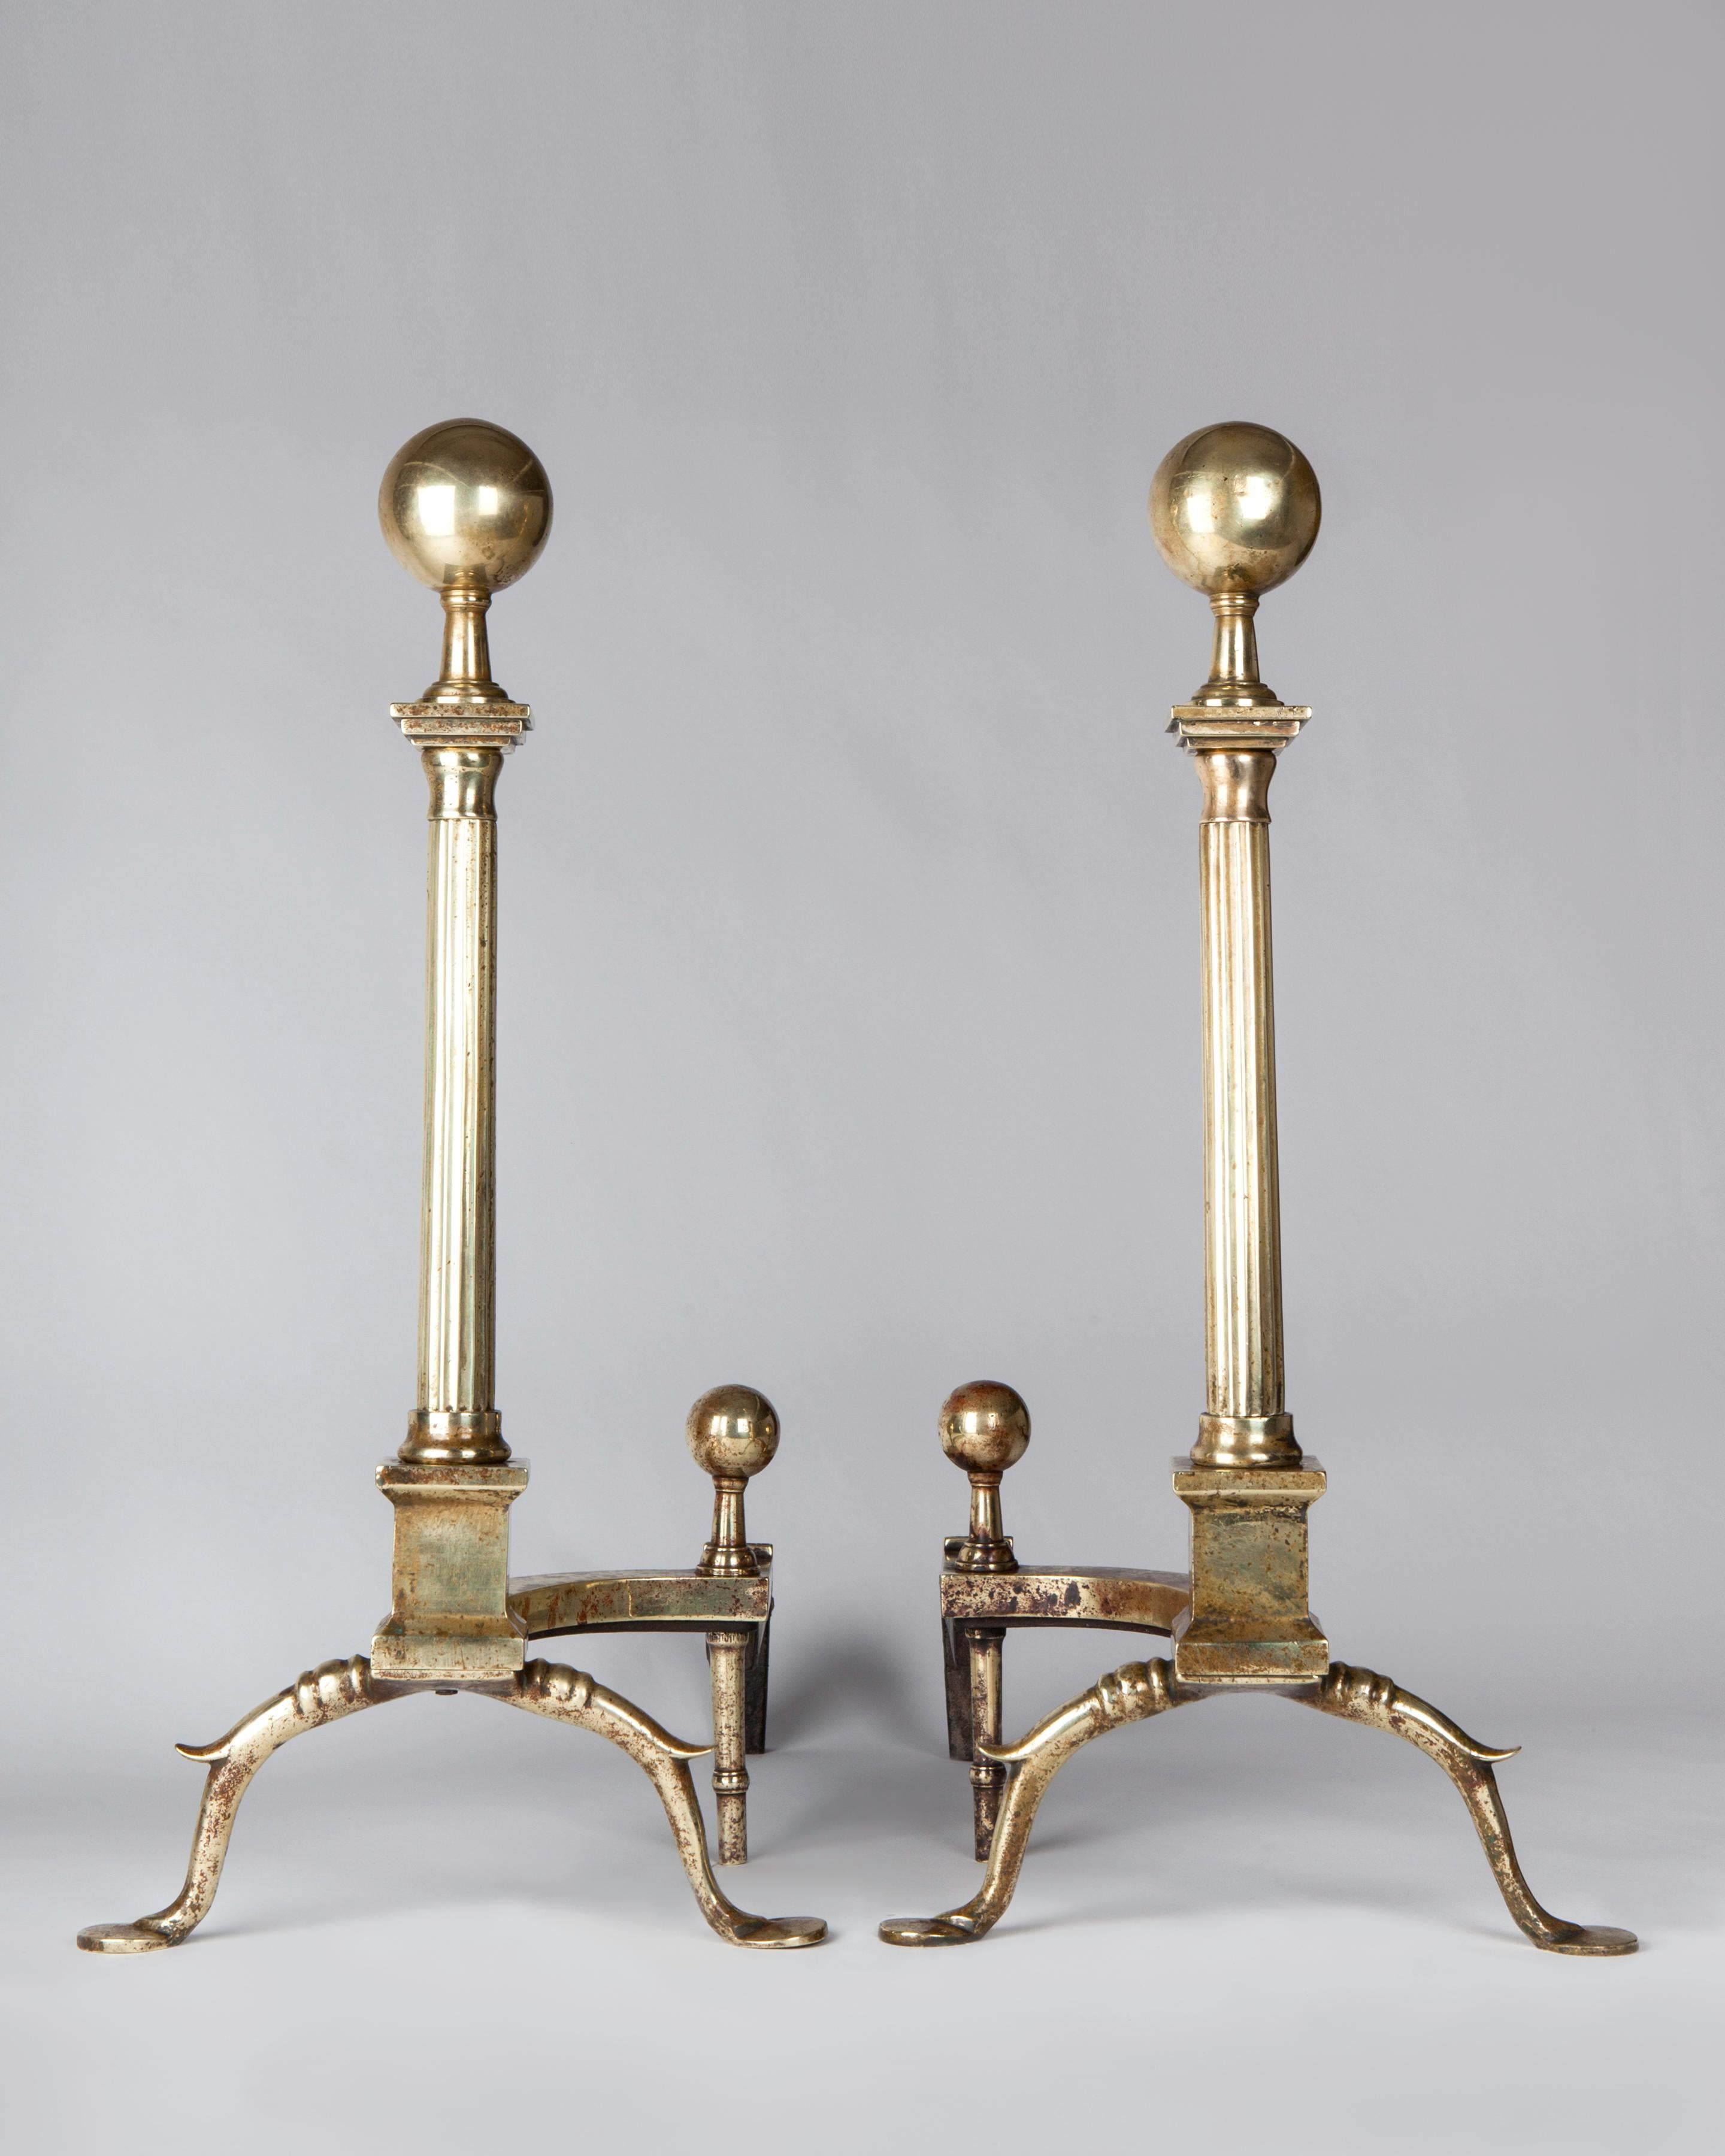 AFP0632

A pair of antique brass andirons of superb quality, having fluted column shafts with ball finials set on rectangular plinths and cusped legs. The offset backs are accented with small brass ball finials and drop legs. In an aged polished